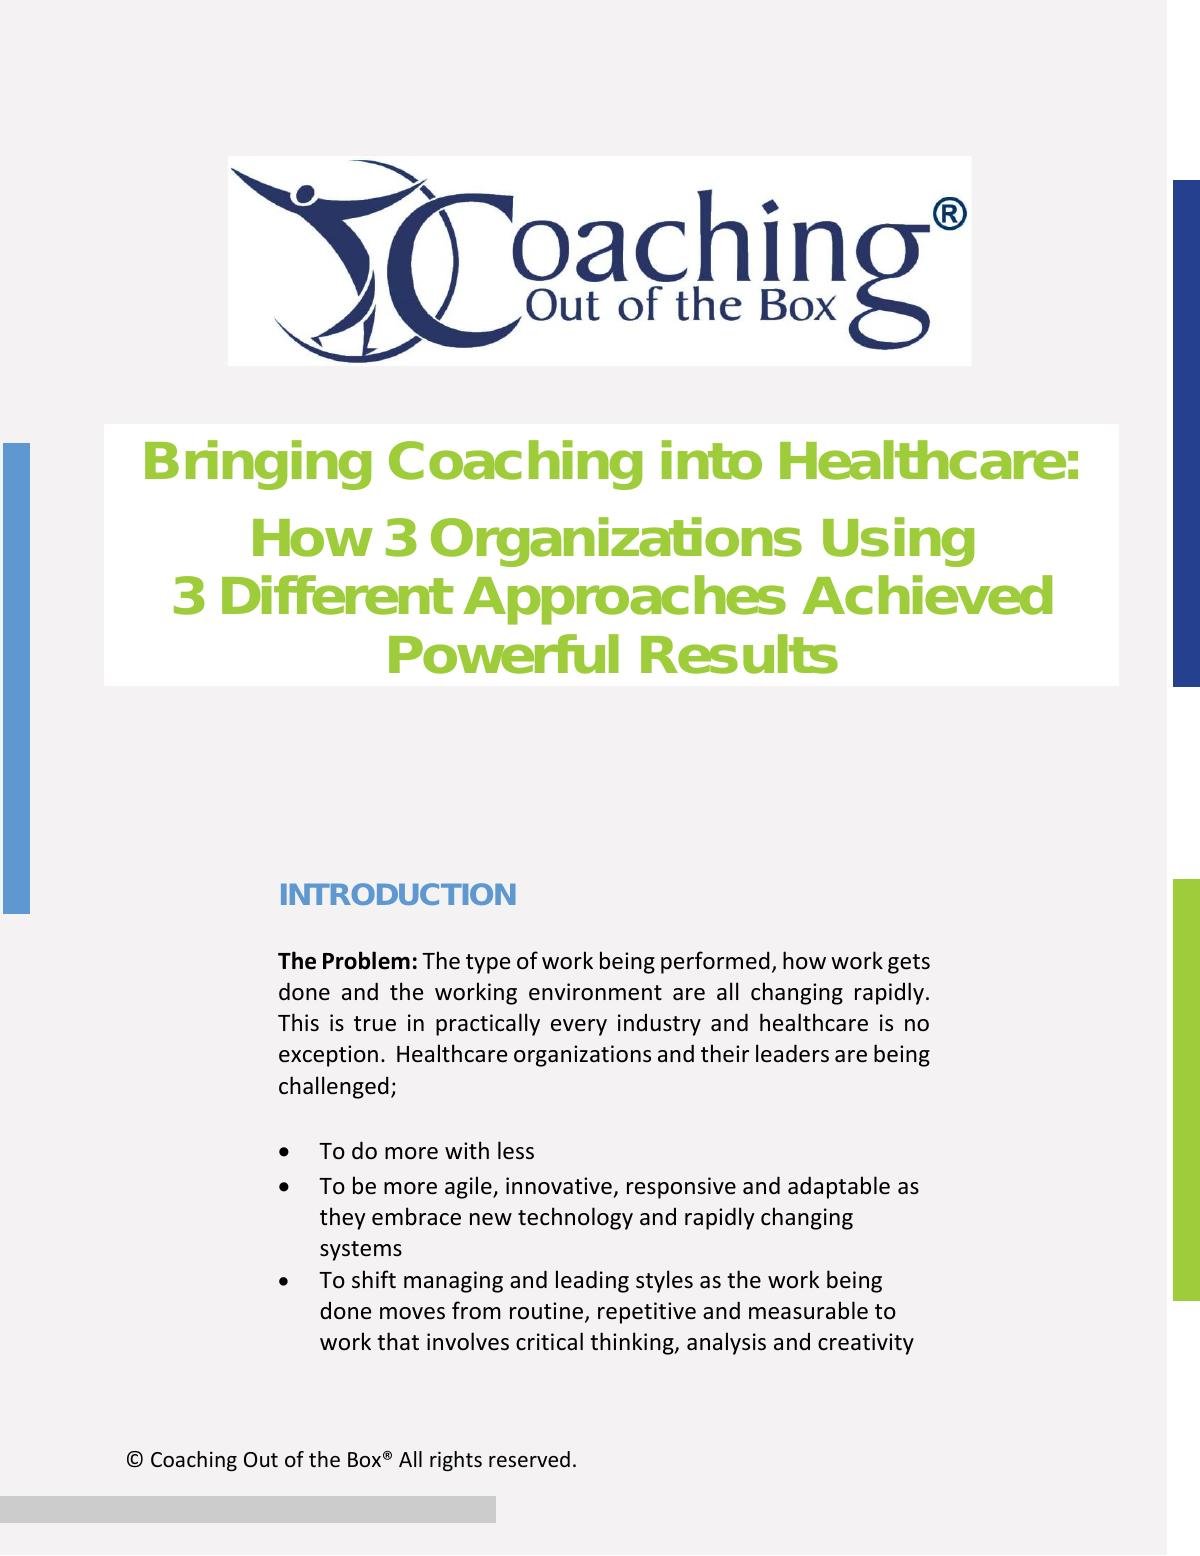 Bringing Coaching to Healthcare Organizations